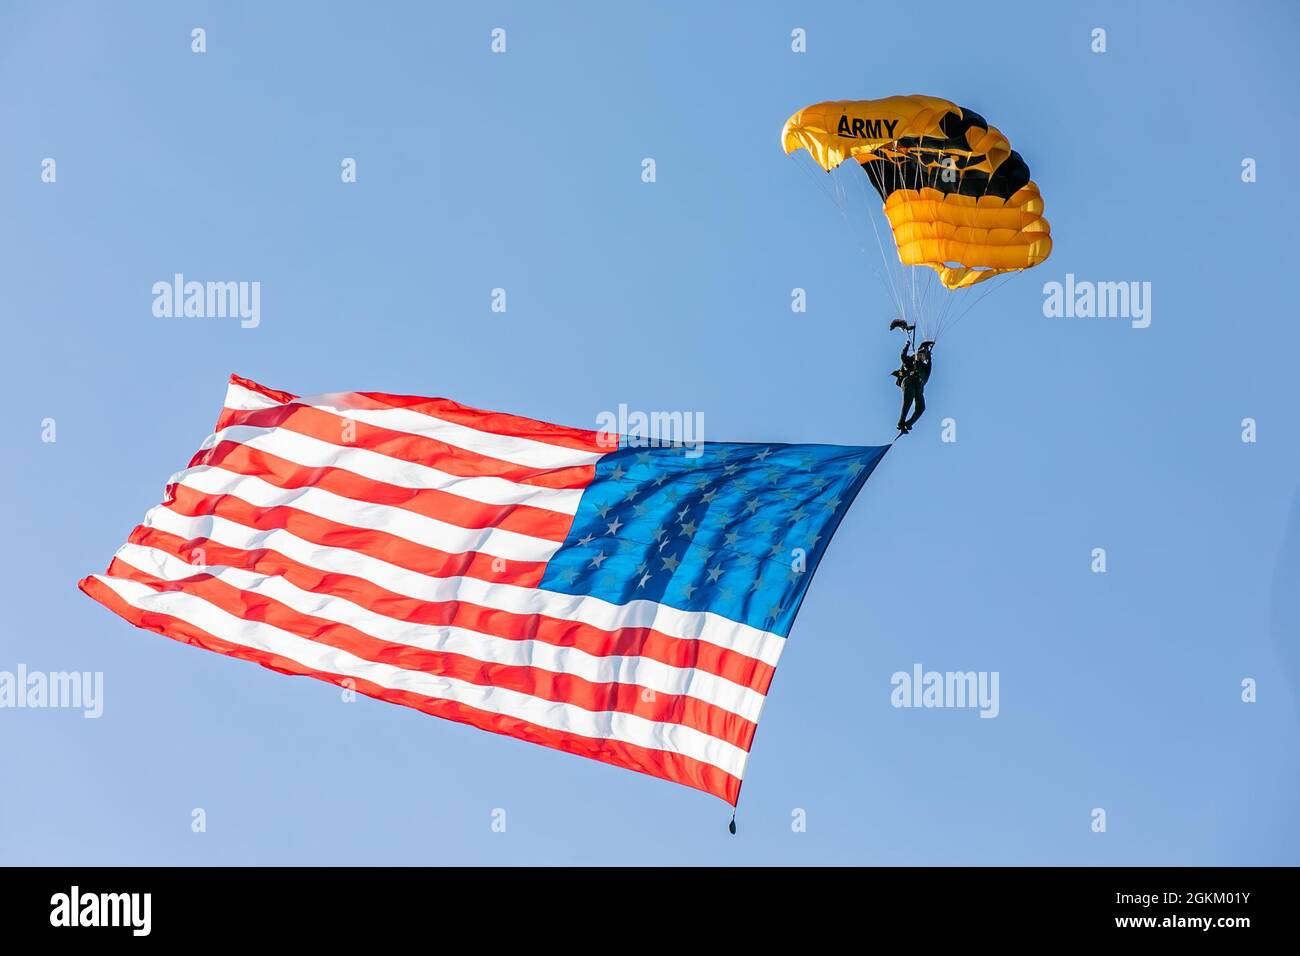 Staff Sgt. Dominic Perry makes a jump with the American flag banner over Laurinburg-Maxton Airport. Stock Photo